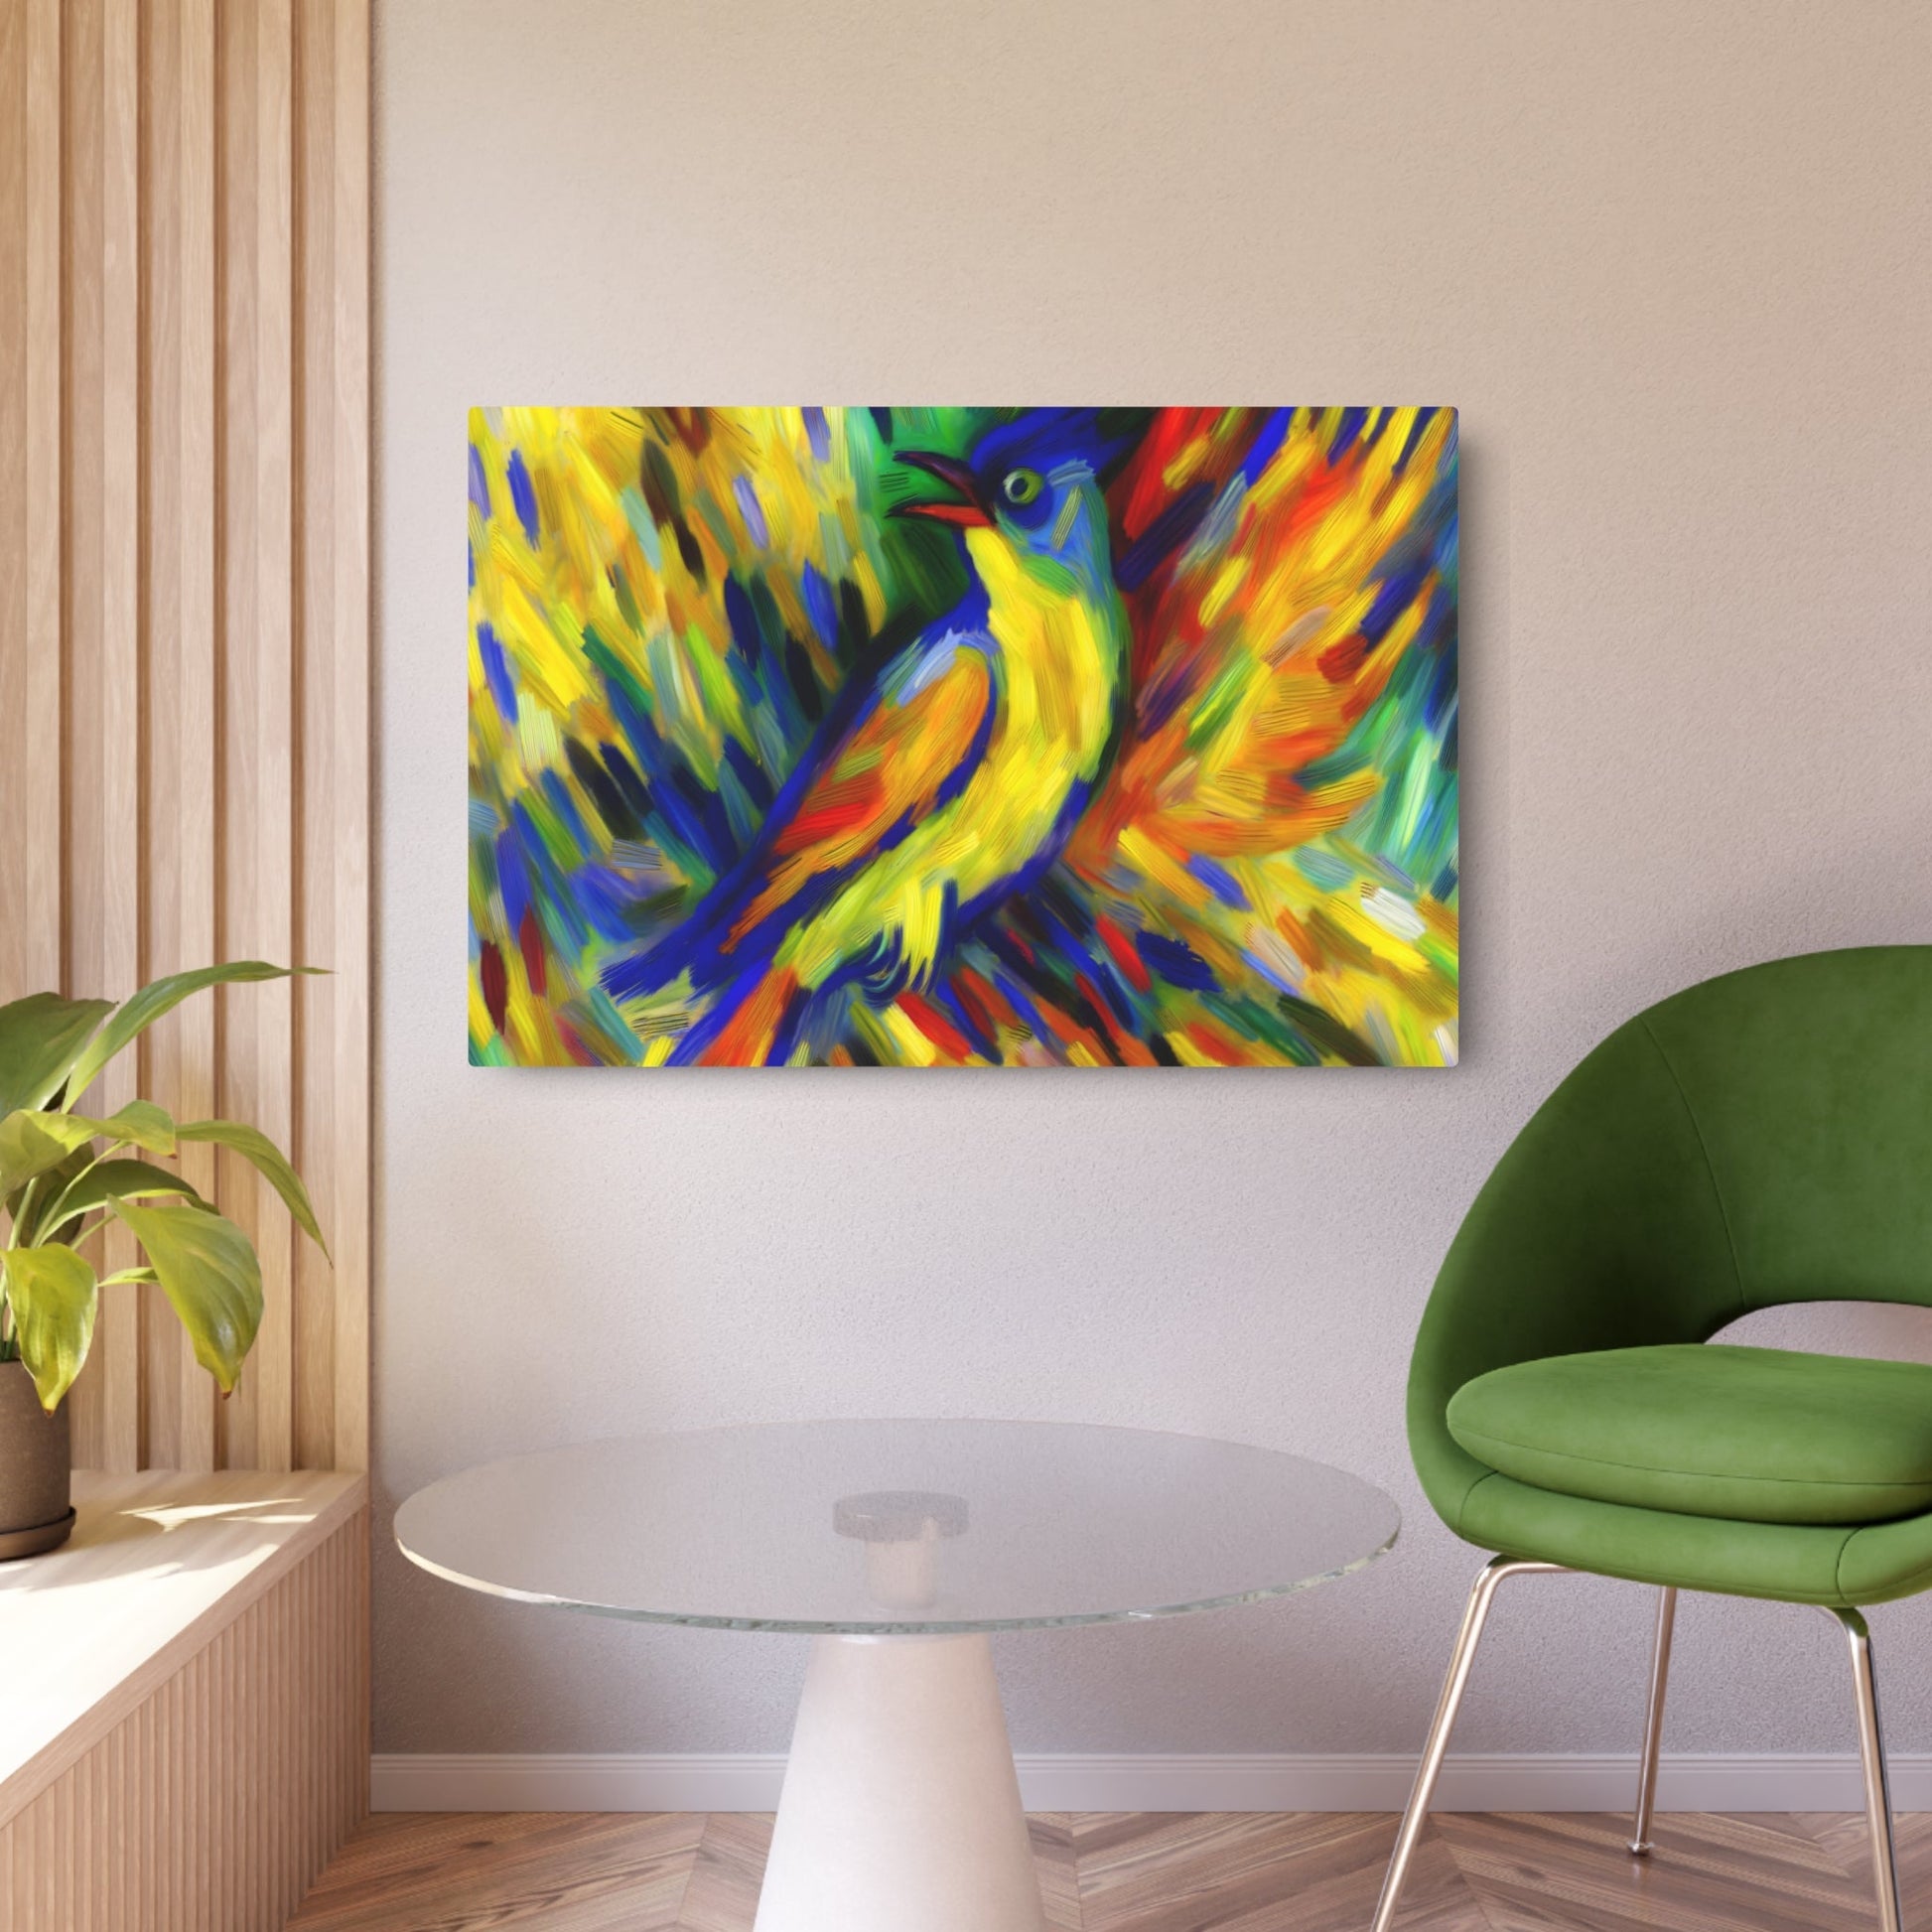 Metal Poster Art | "Expressionism Western Art Style - Vibrant Bird Scene with Intense Colors and Overstated Strokes" - Metal Poster Art 36″ x 24″ (Horizontal) 0.12''